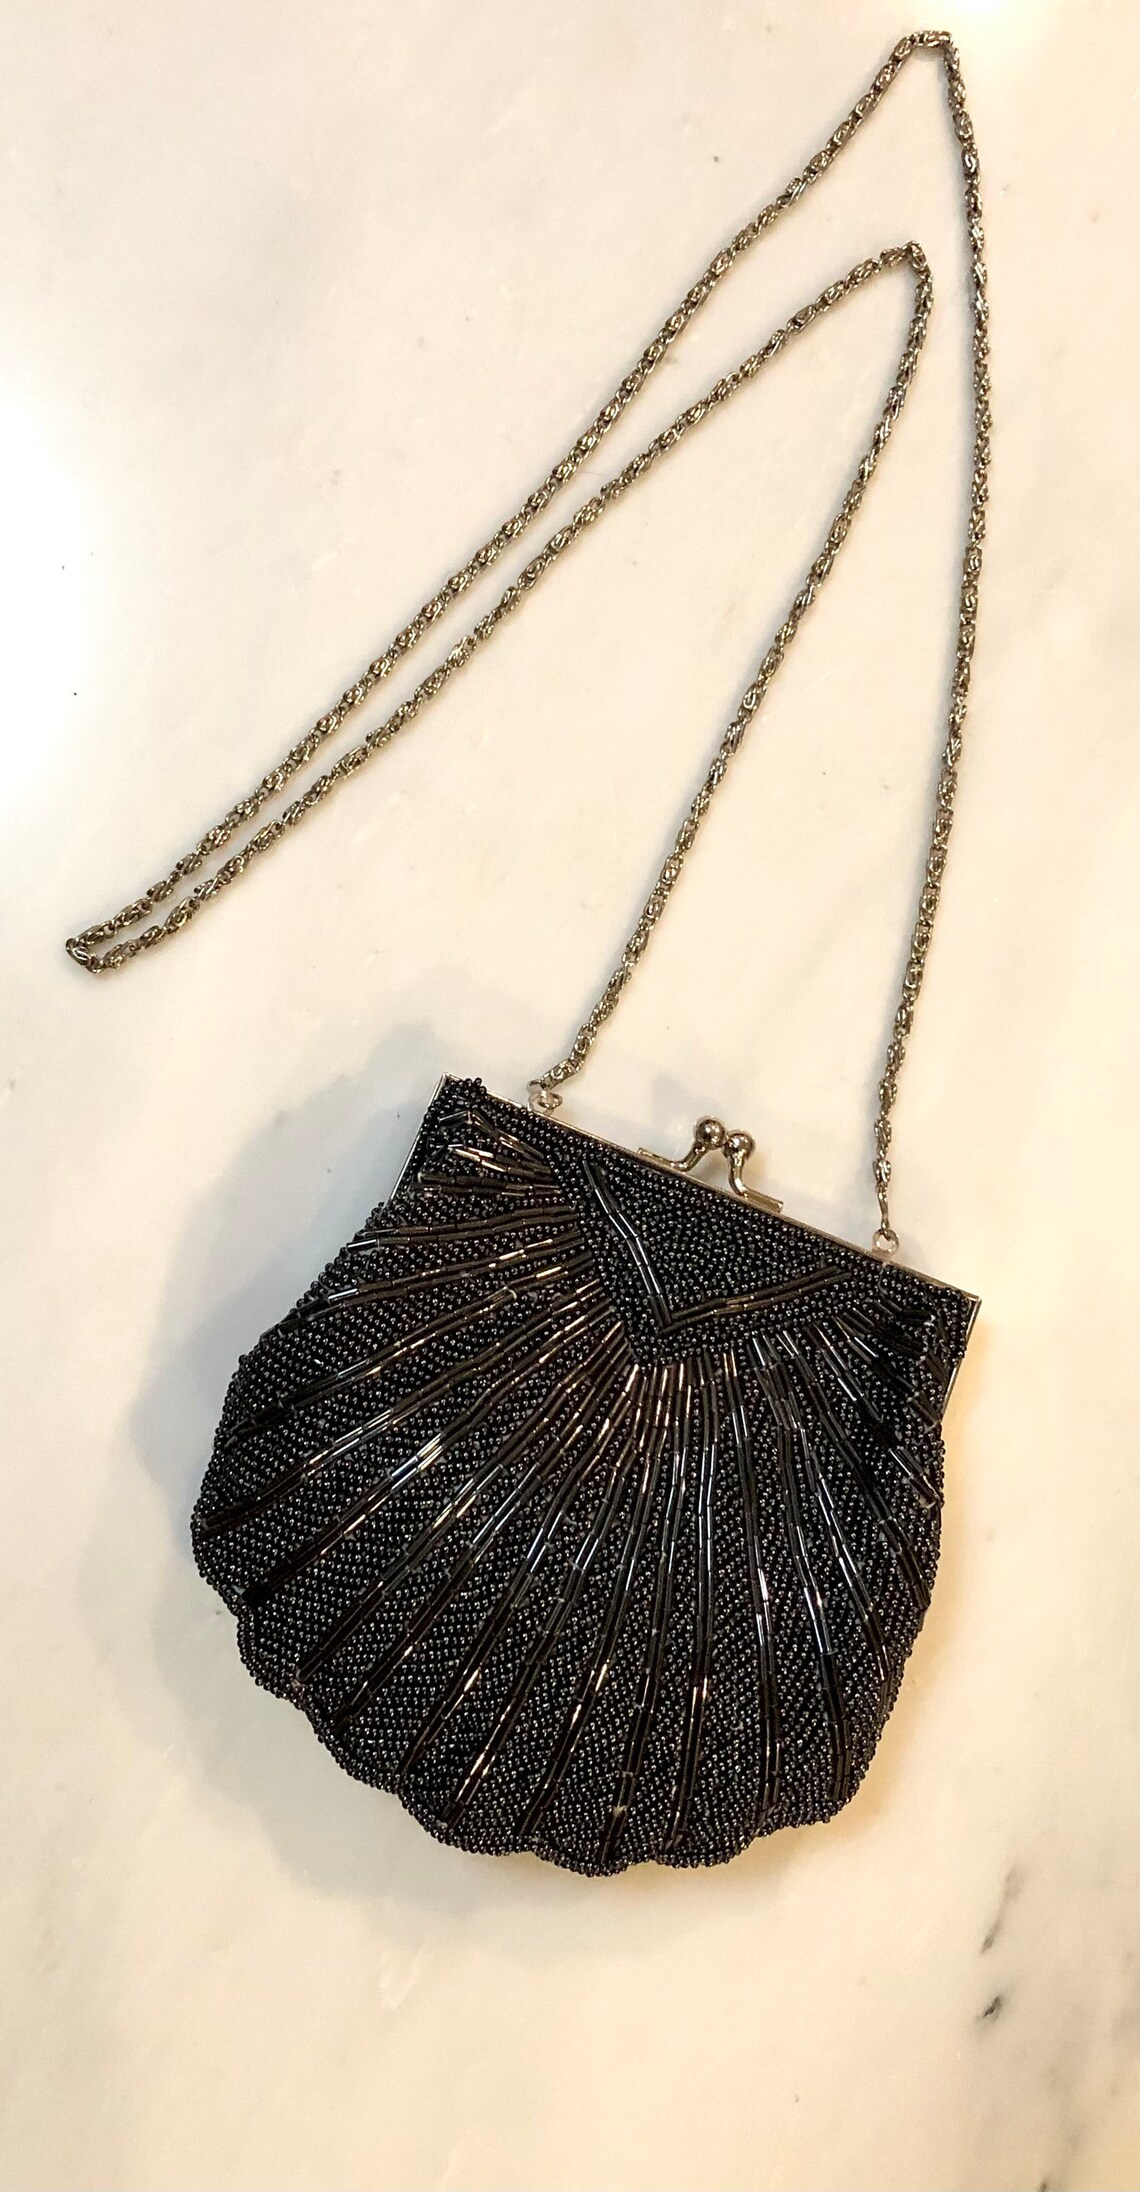 Black and Silver Vintage Beaded Clam Shell Clutch PurseArt | Etsy